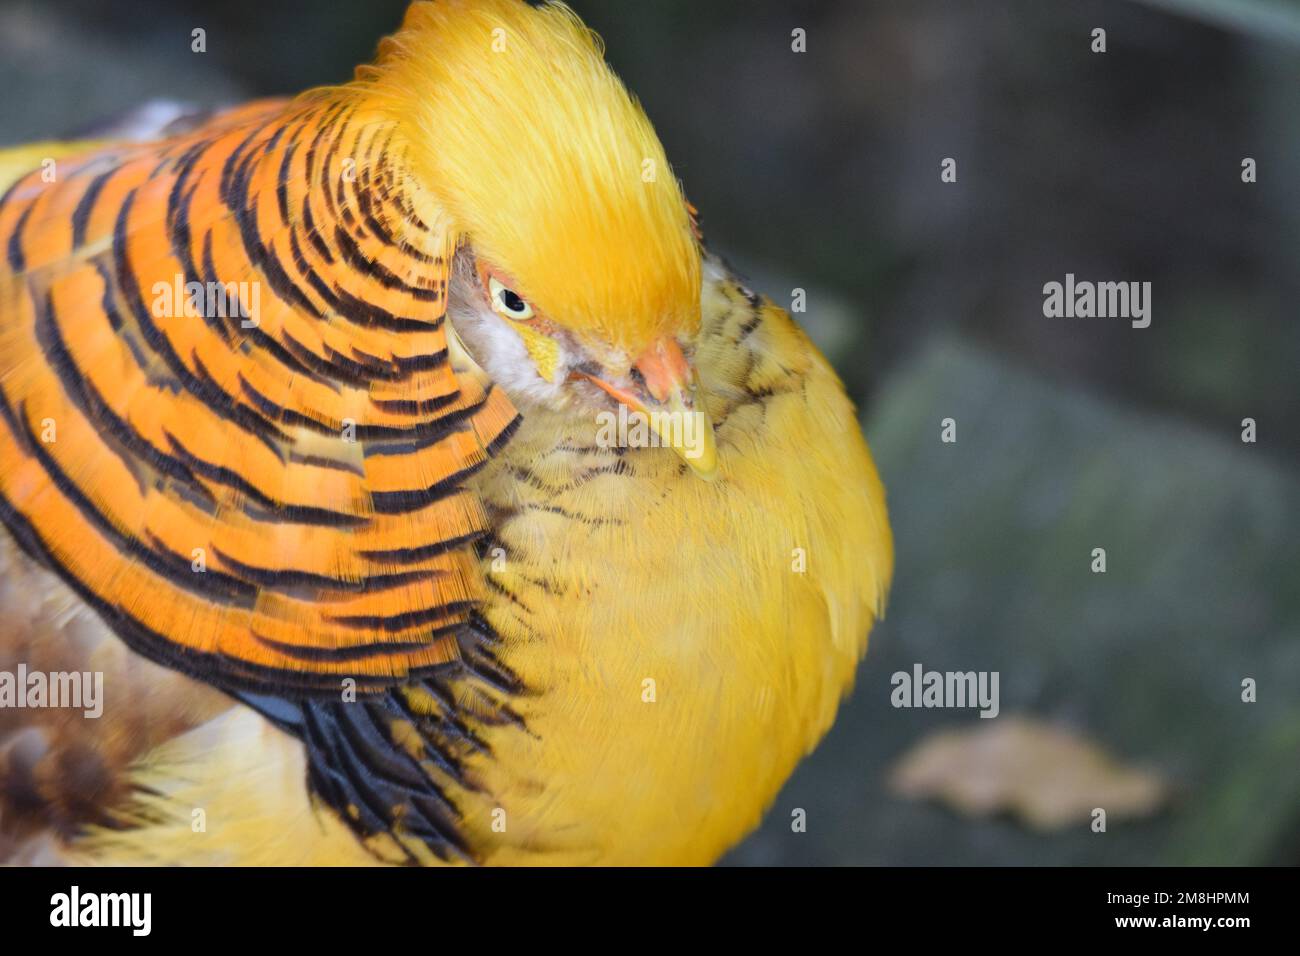 Beautiful Golden Pheasant native to China, close-up of face and head, showing concentric circles and yellow / gold crest. Stock Photo